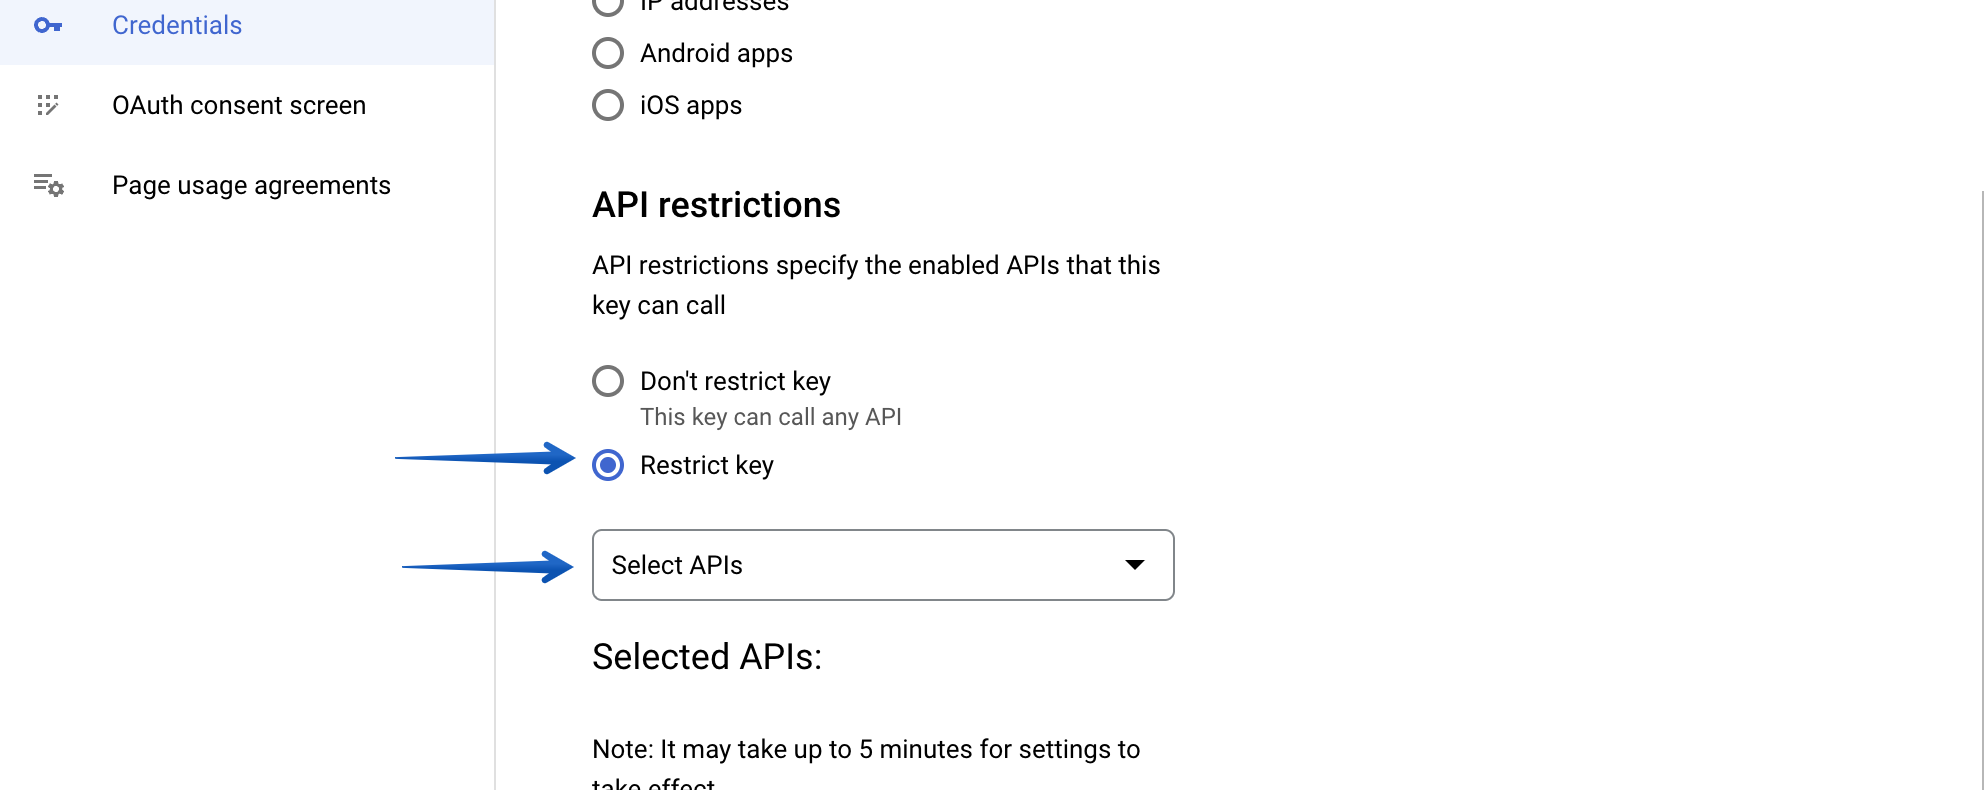 Pressing the Restrict key radio button in the API restrictions section, then pressing the Select APIs drop-down menu